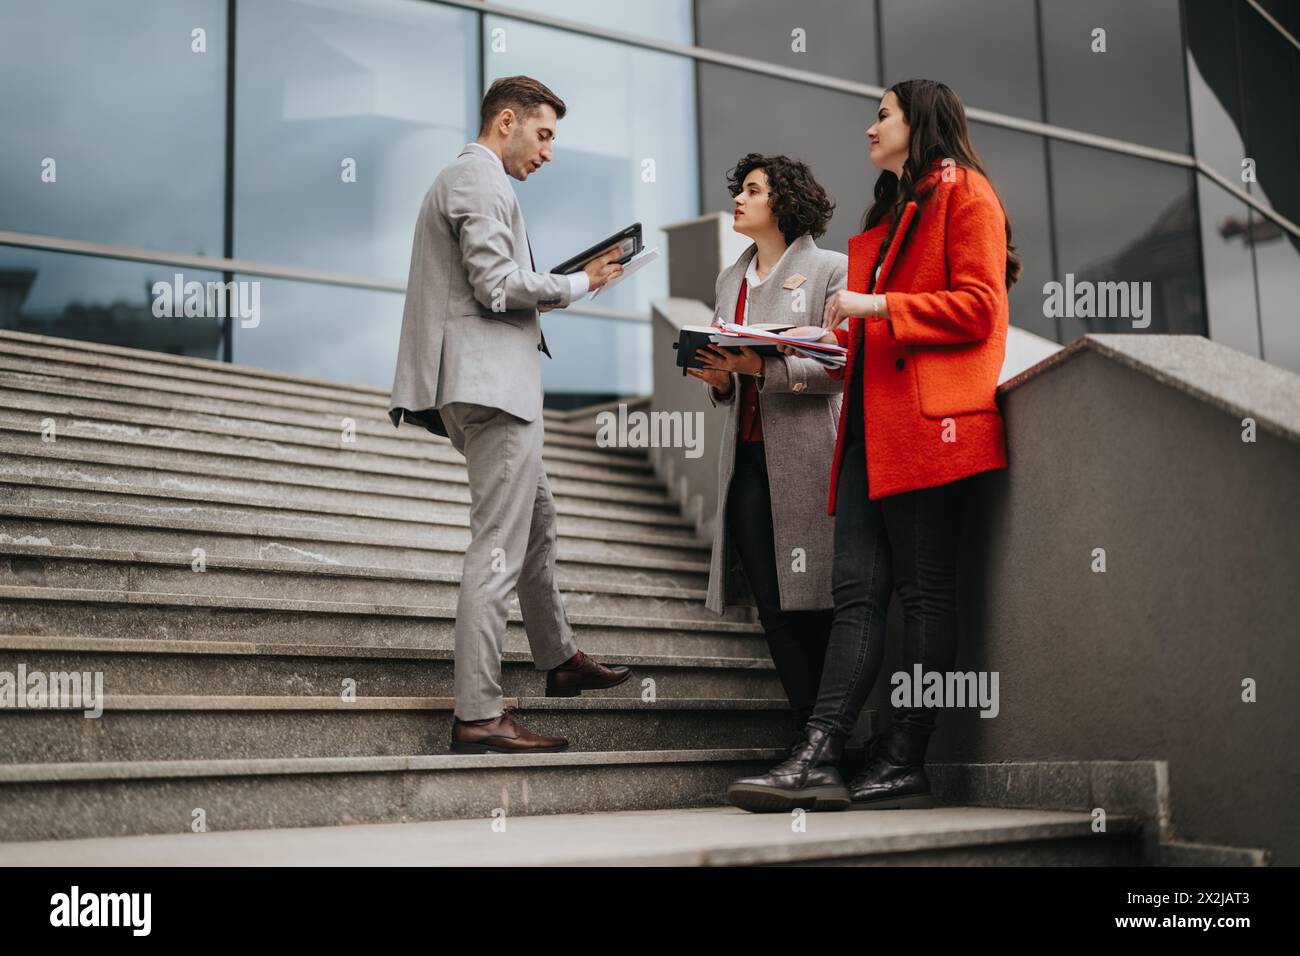 Business associates discussing strategy on office stairs outdoors Stock Photo